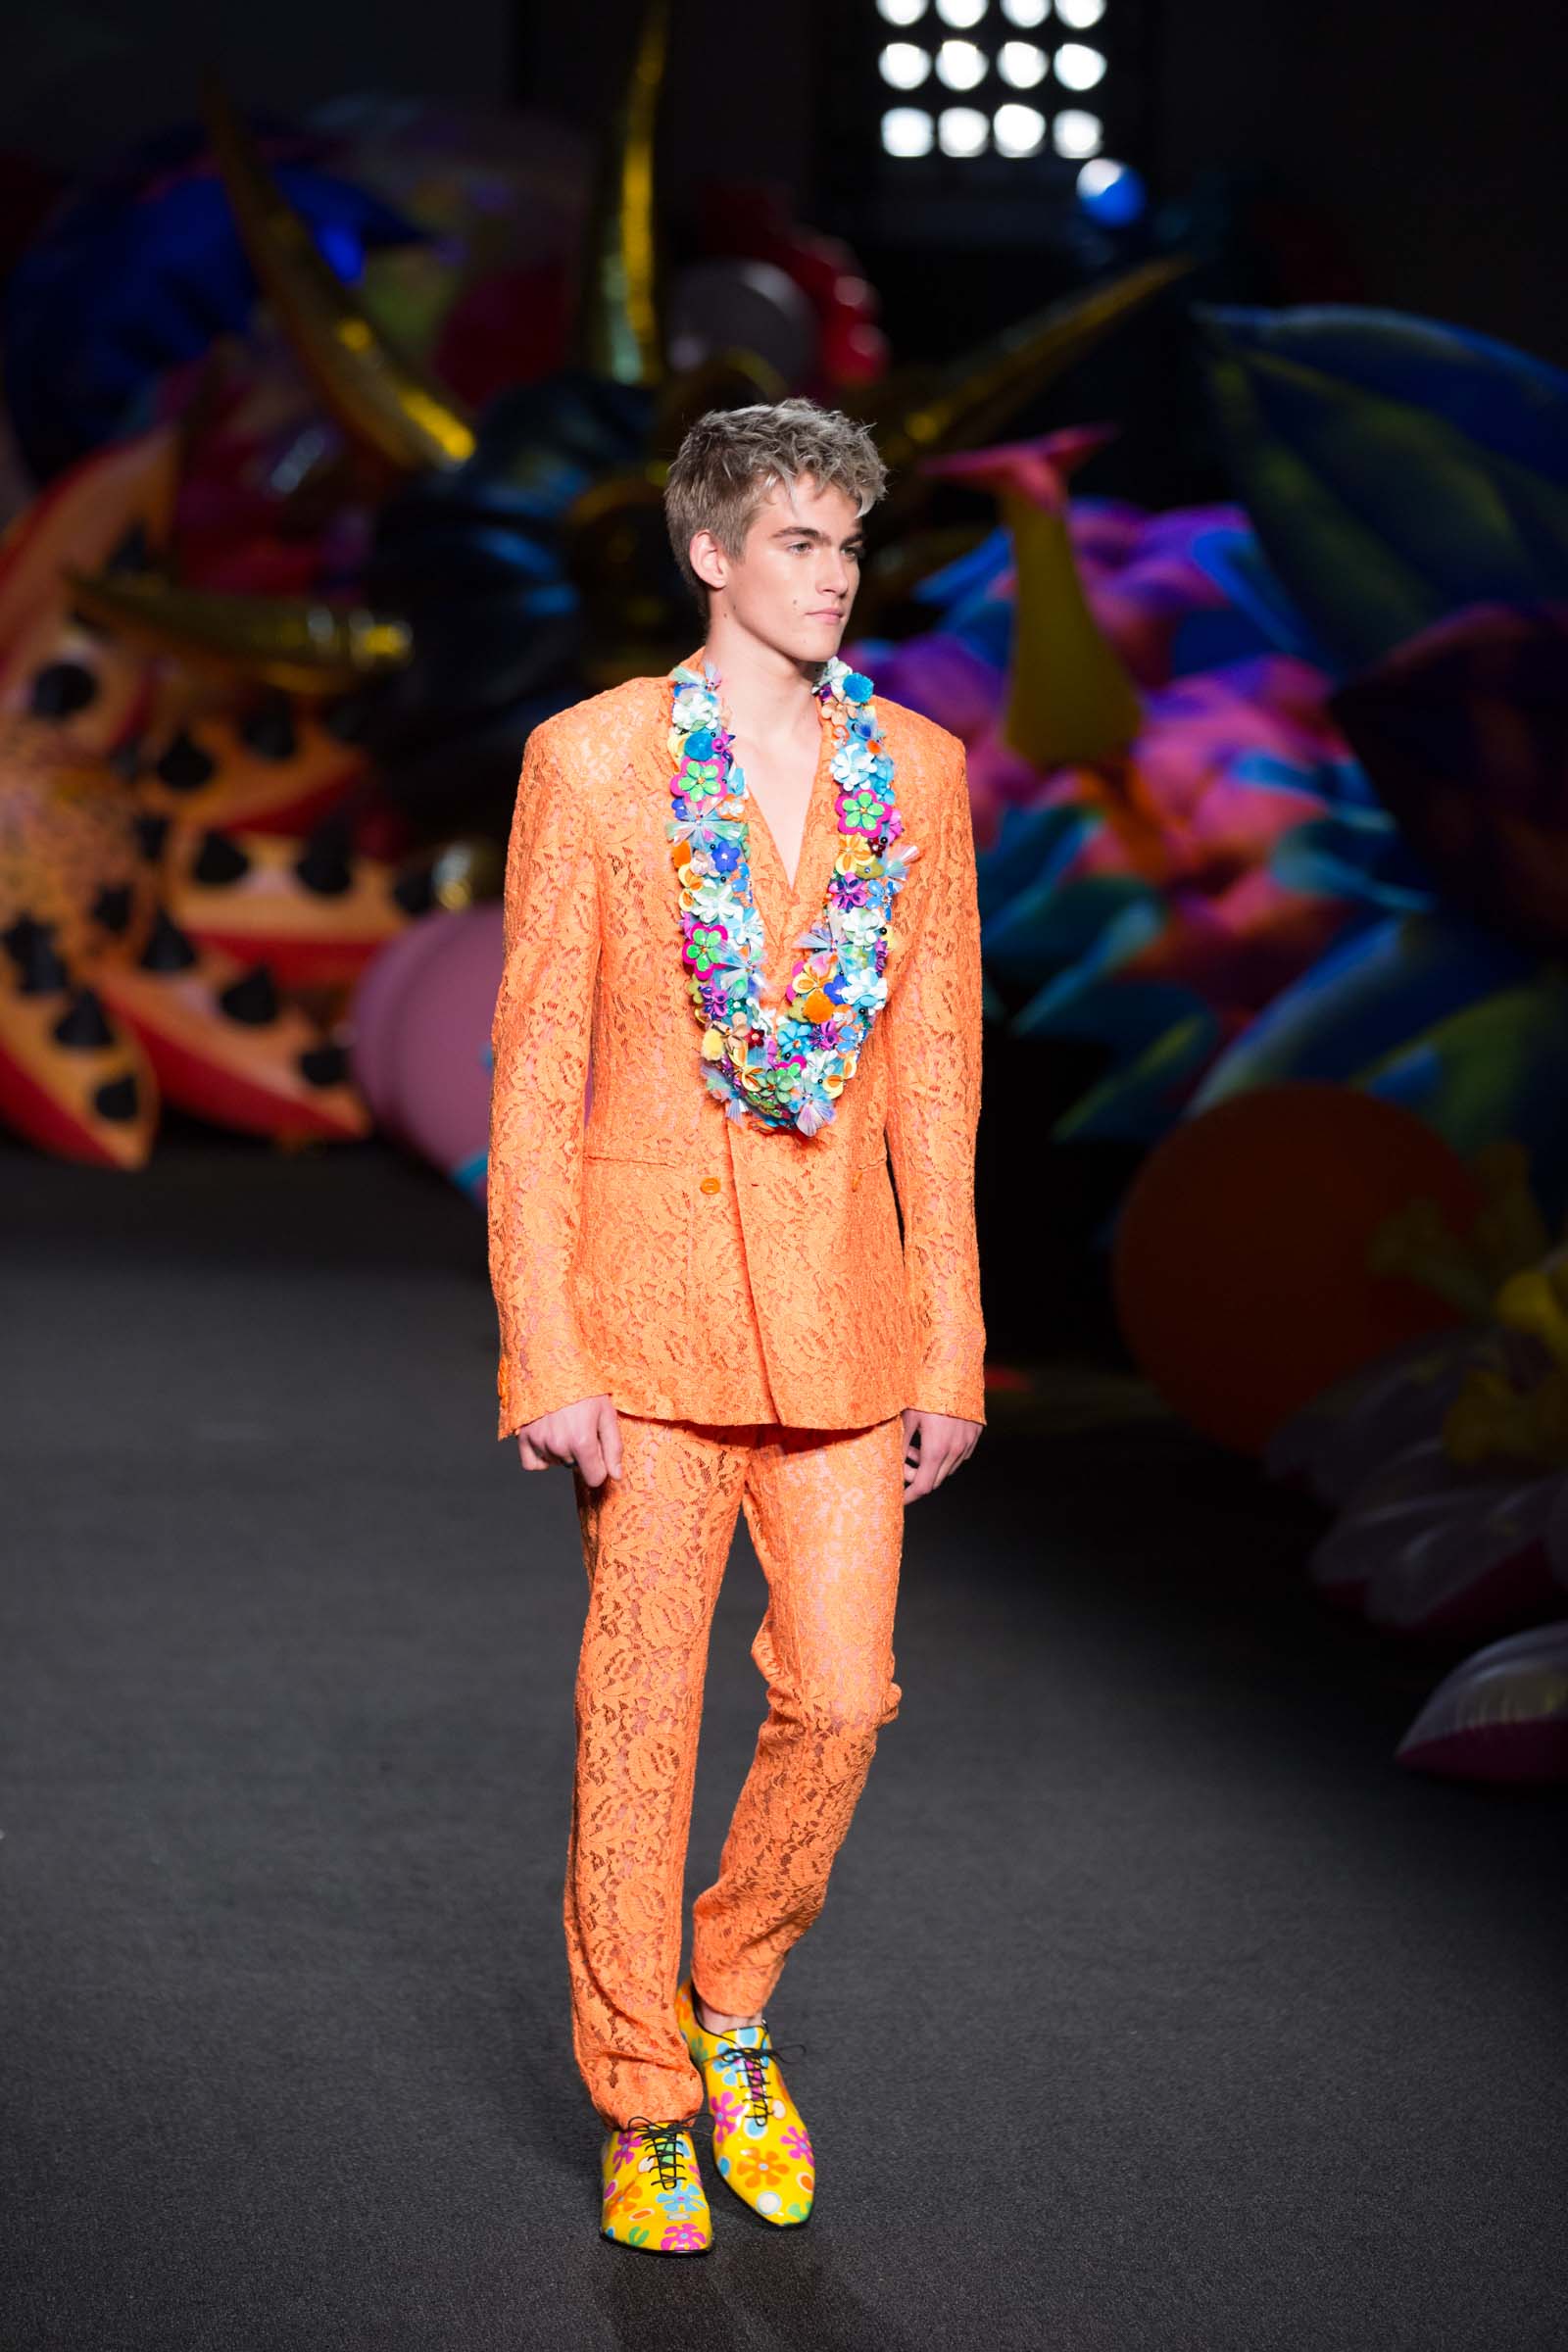 GUEST walks the runway at the Moschino Spring/Summer 17 Menswear and Women's Resort Collection during MADE LA at L.A. LIVE Event Deck on June 10, 2016 in Los Angeles, California, USA